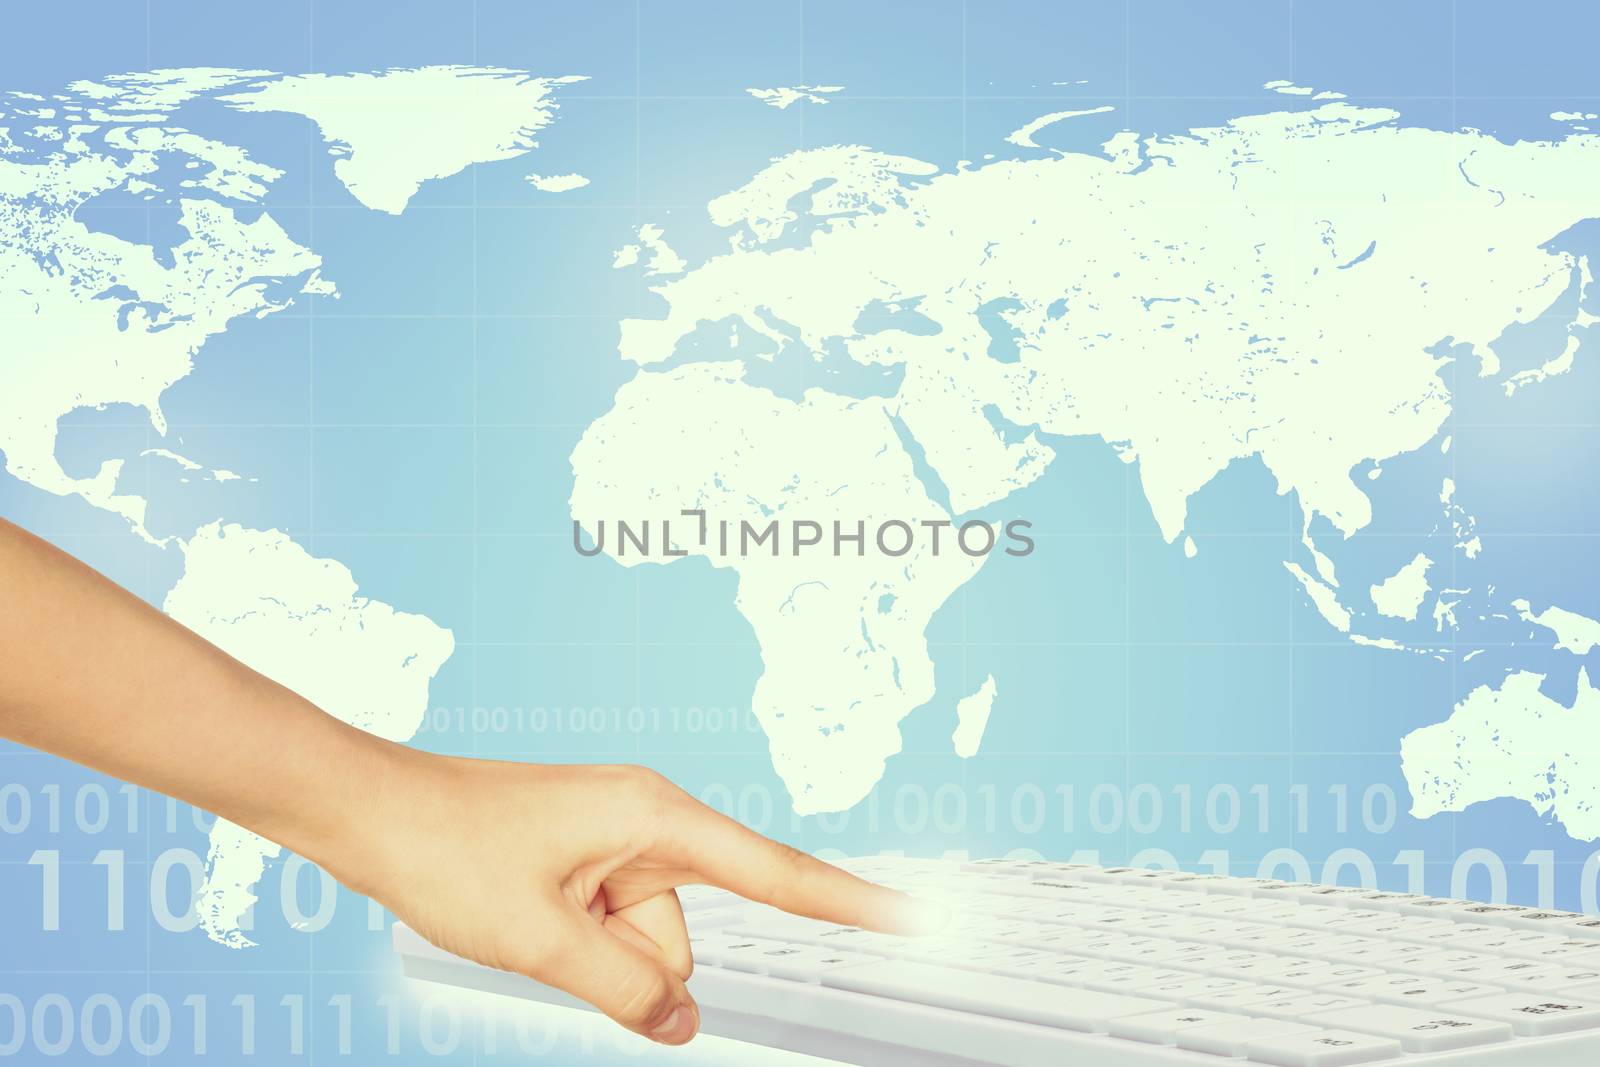 Humans finger touching keyboard on abstract colorful background with world map